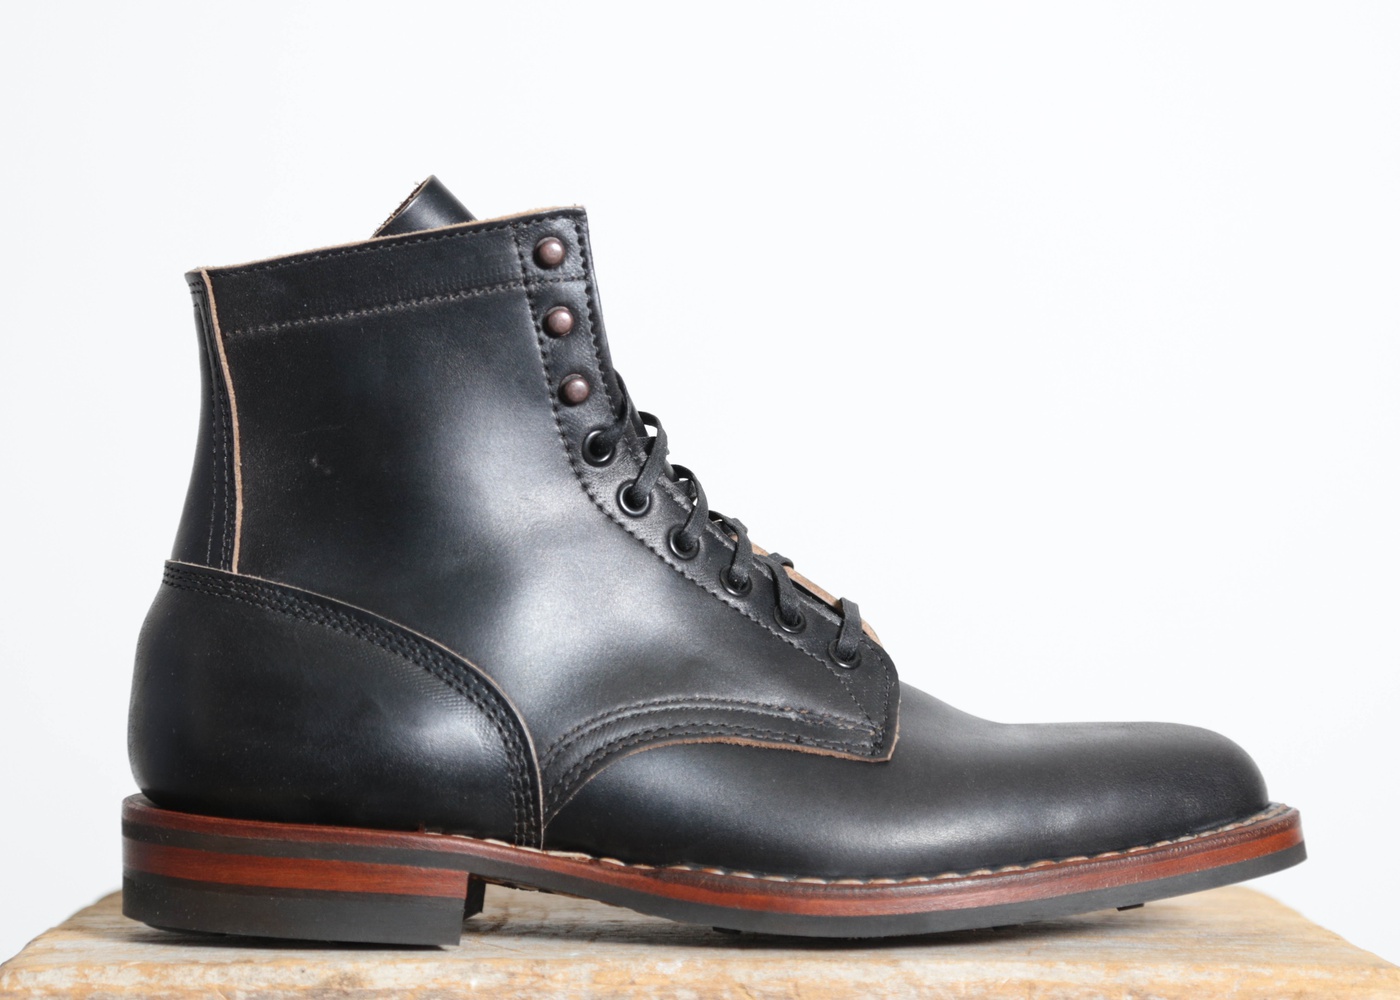 White's MP Service Boot - CHROMEXCEL nyc